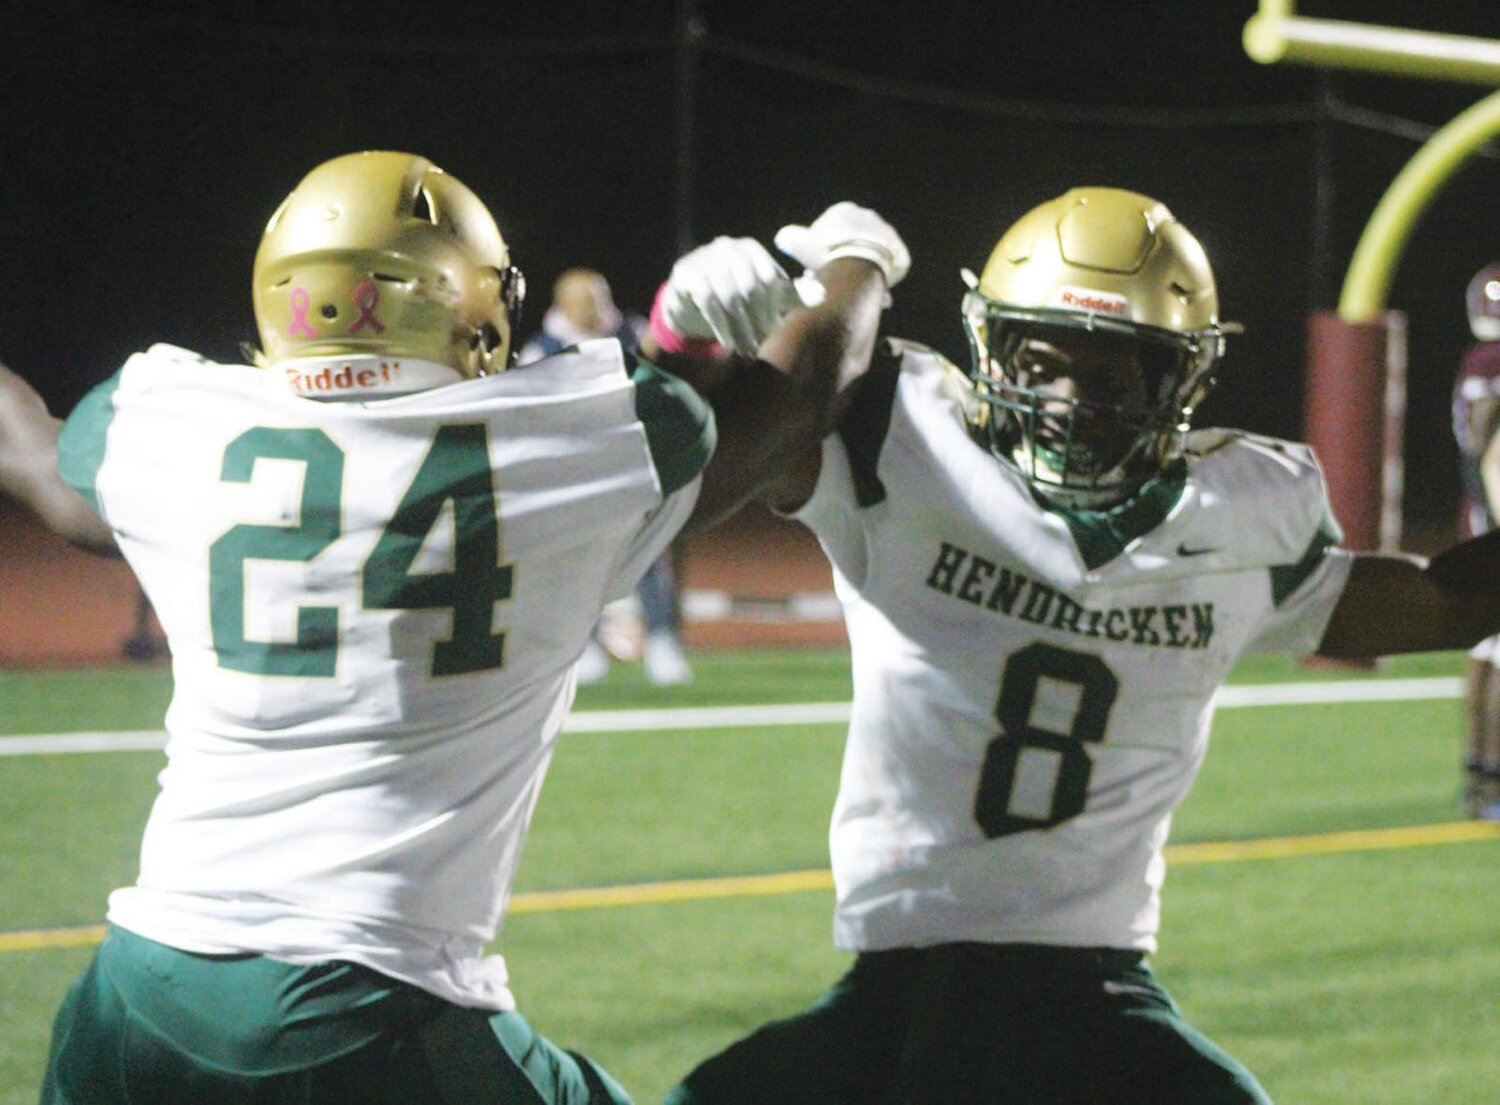 RUNNING TO THE WIN: Bishop Hendricken running backs Oscar Weah (8) and Ronjai Francis celebrate after the former rushed for a touchdown in the second quarter of last week’s state championship rematch against rival La Salle. Weah finished with three scores while the duo combined for over 200 yards on the ground. (Photos by Alex Sponseller)